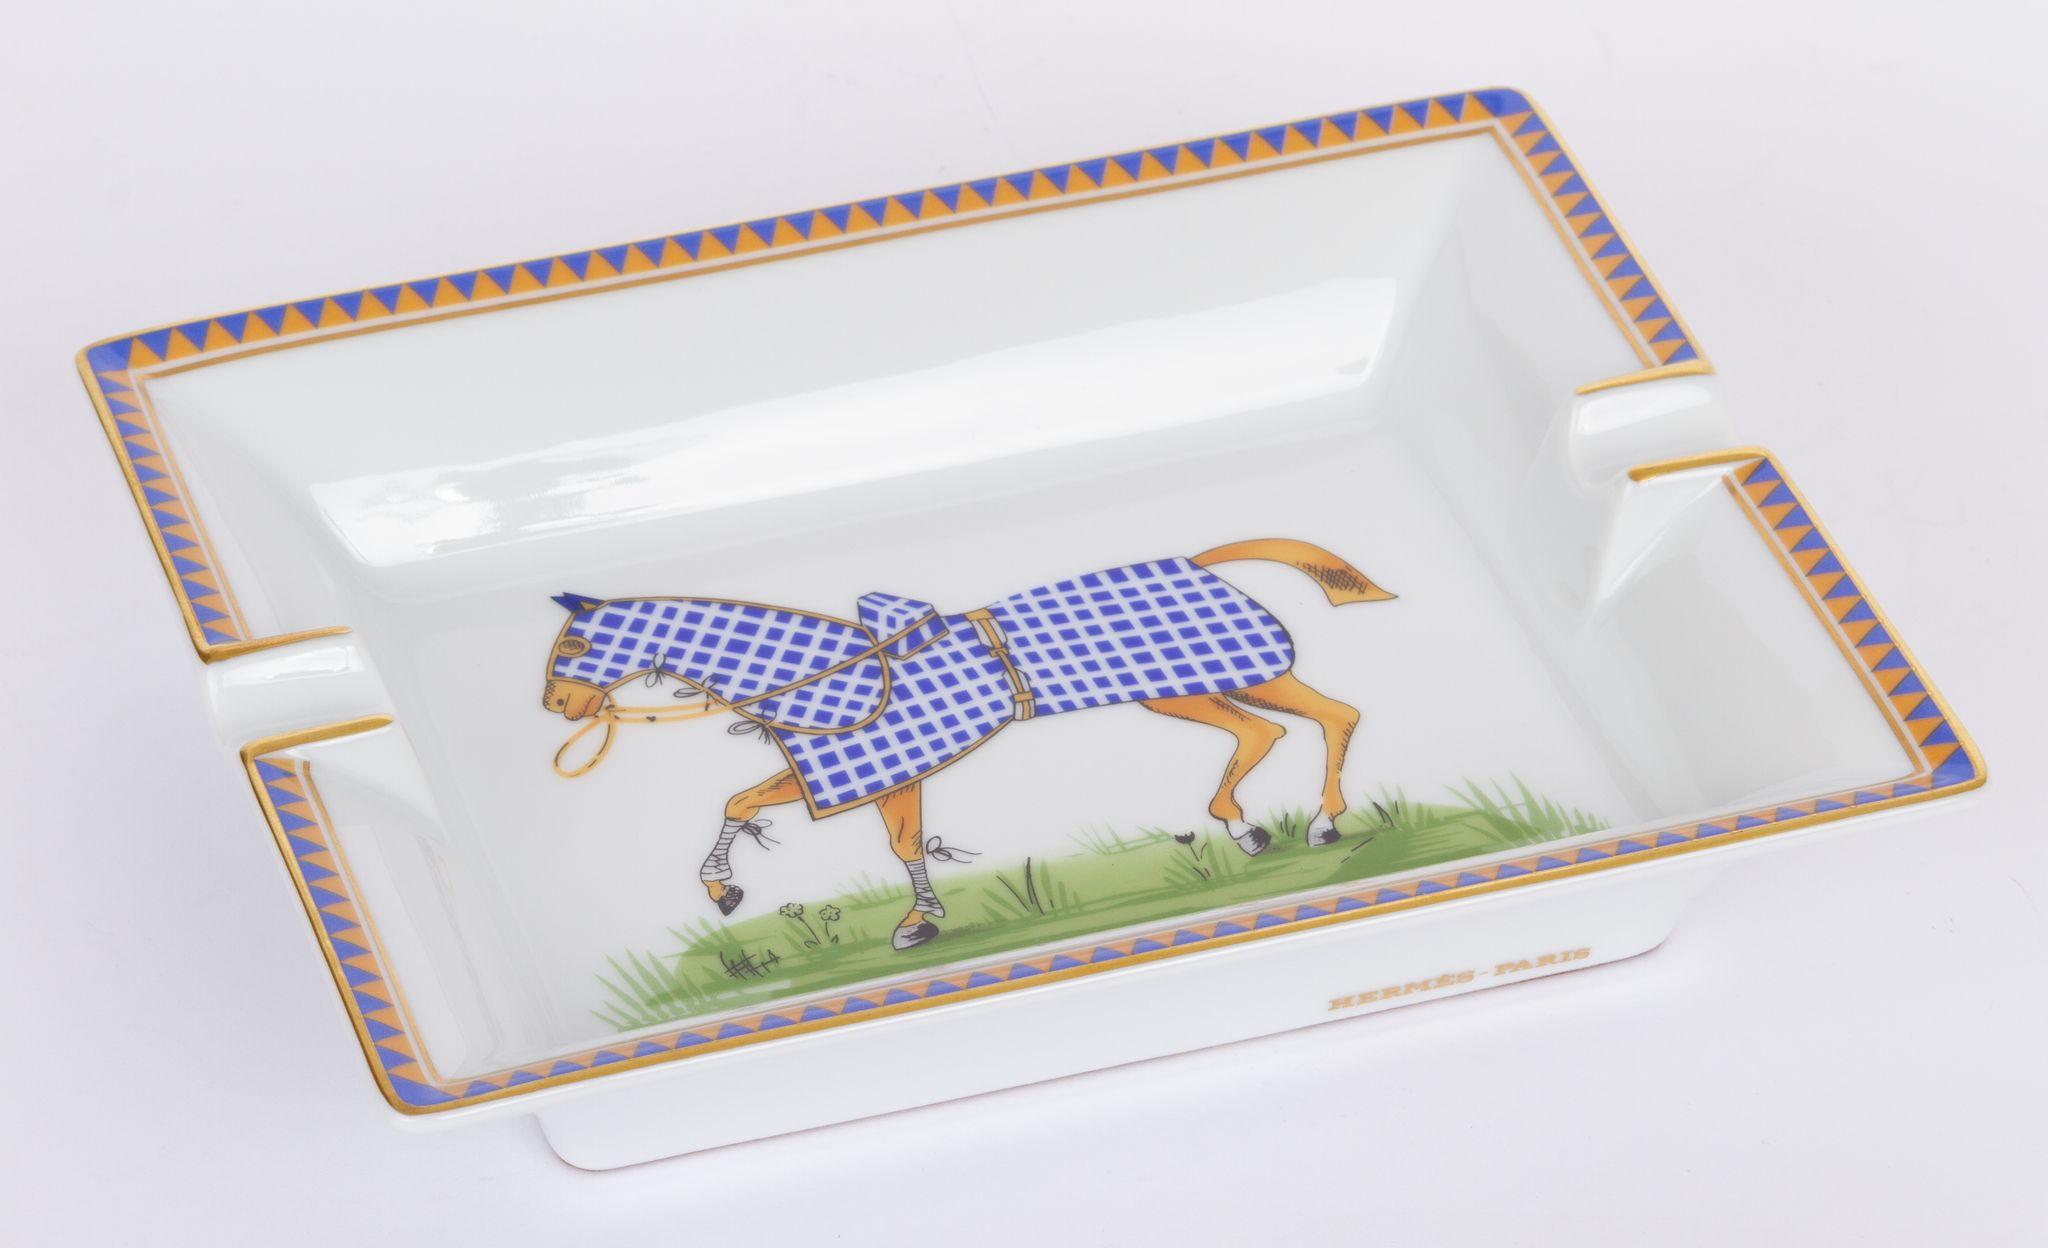 Hermès vintage ashtray in white. In the center is a print of a galloping horse covered in a blue blanket. The piece is in excellent condition and includes the original box.